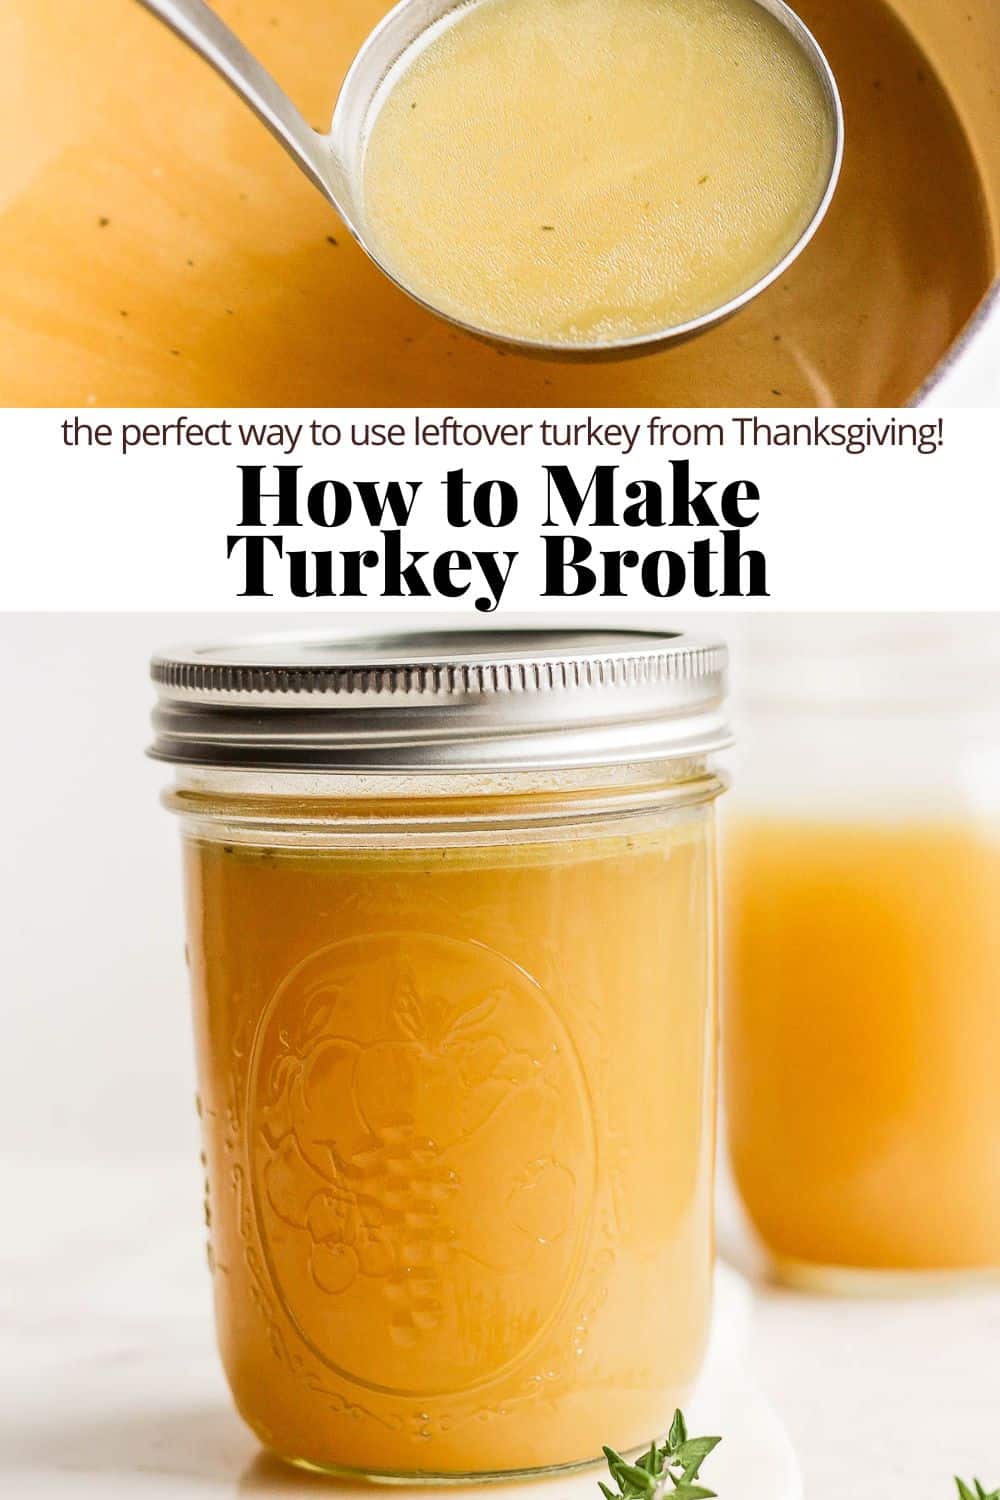 Pinterest image for how to make turkey broth.